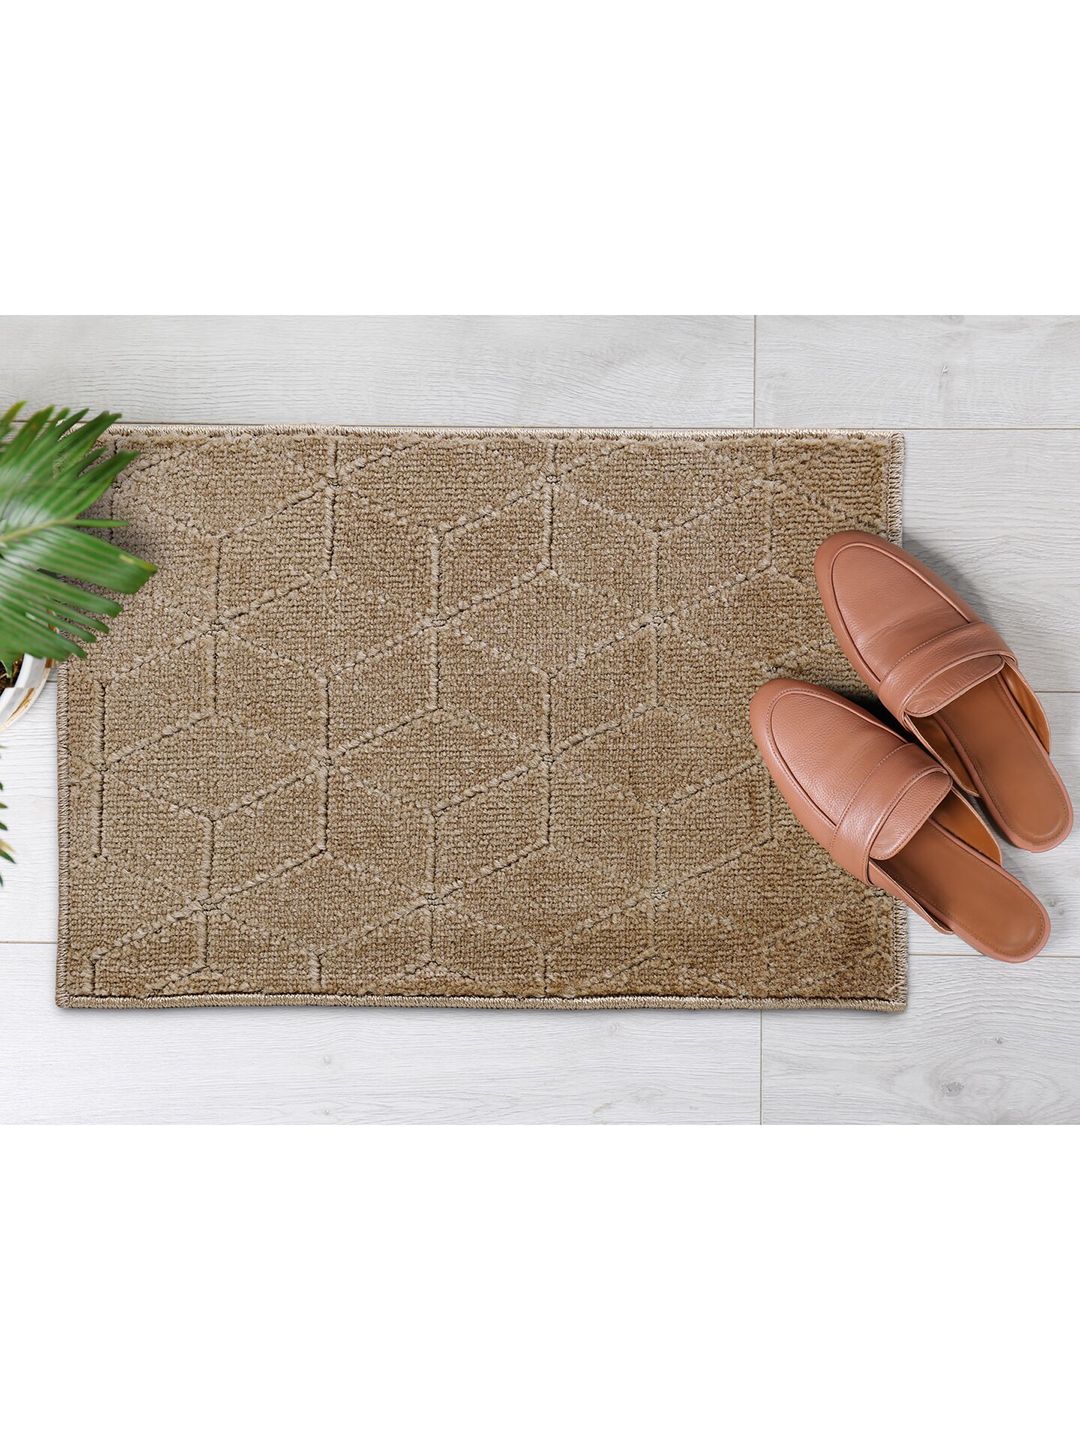 Saral Home Beige Geometric Patterned Cotton Anti-Skid Door Mat Price in India